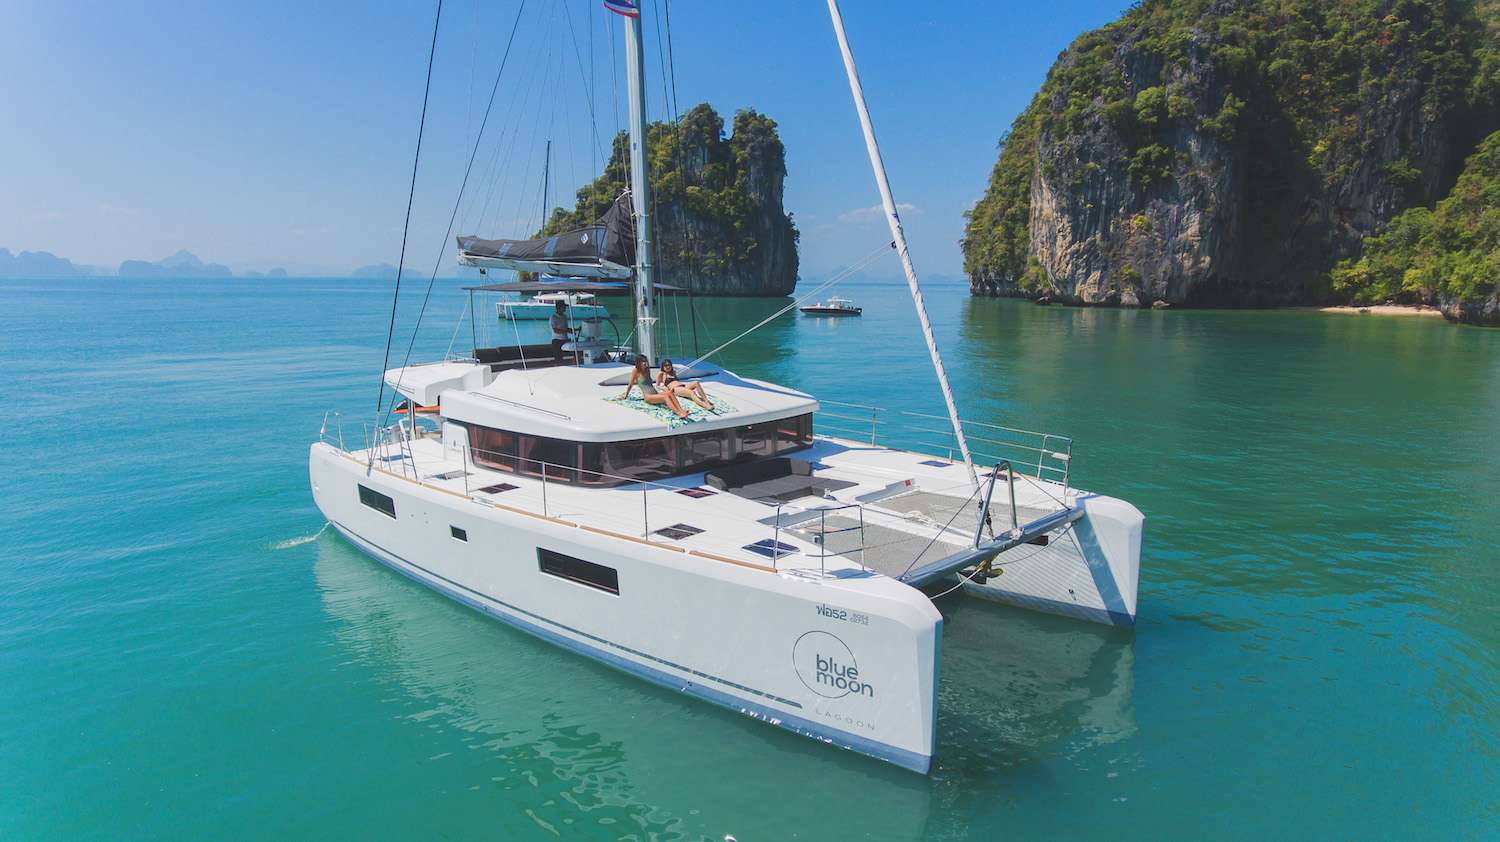 blue moon - Yacht Charter El Nido & Boat hire in Indian Ocean & SE Asia 2